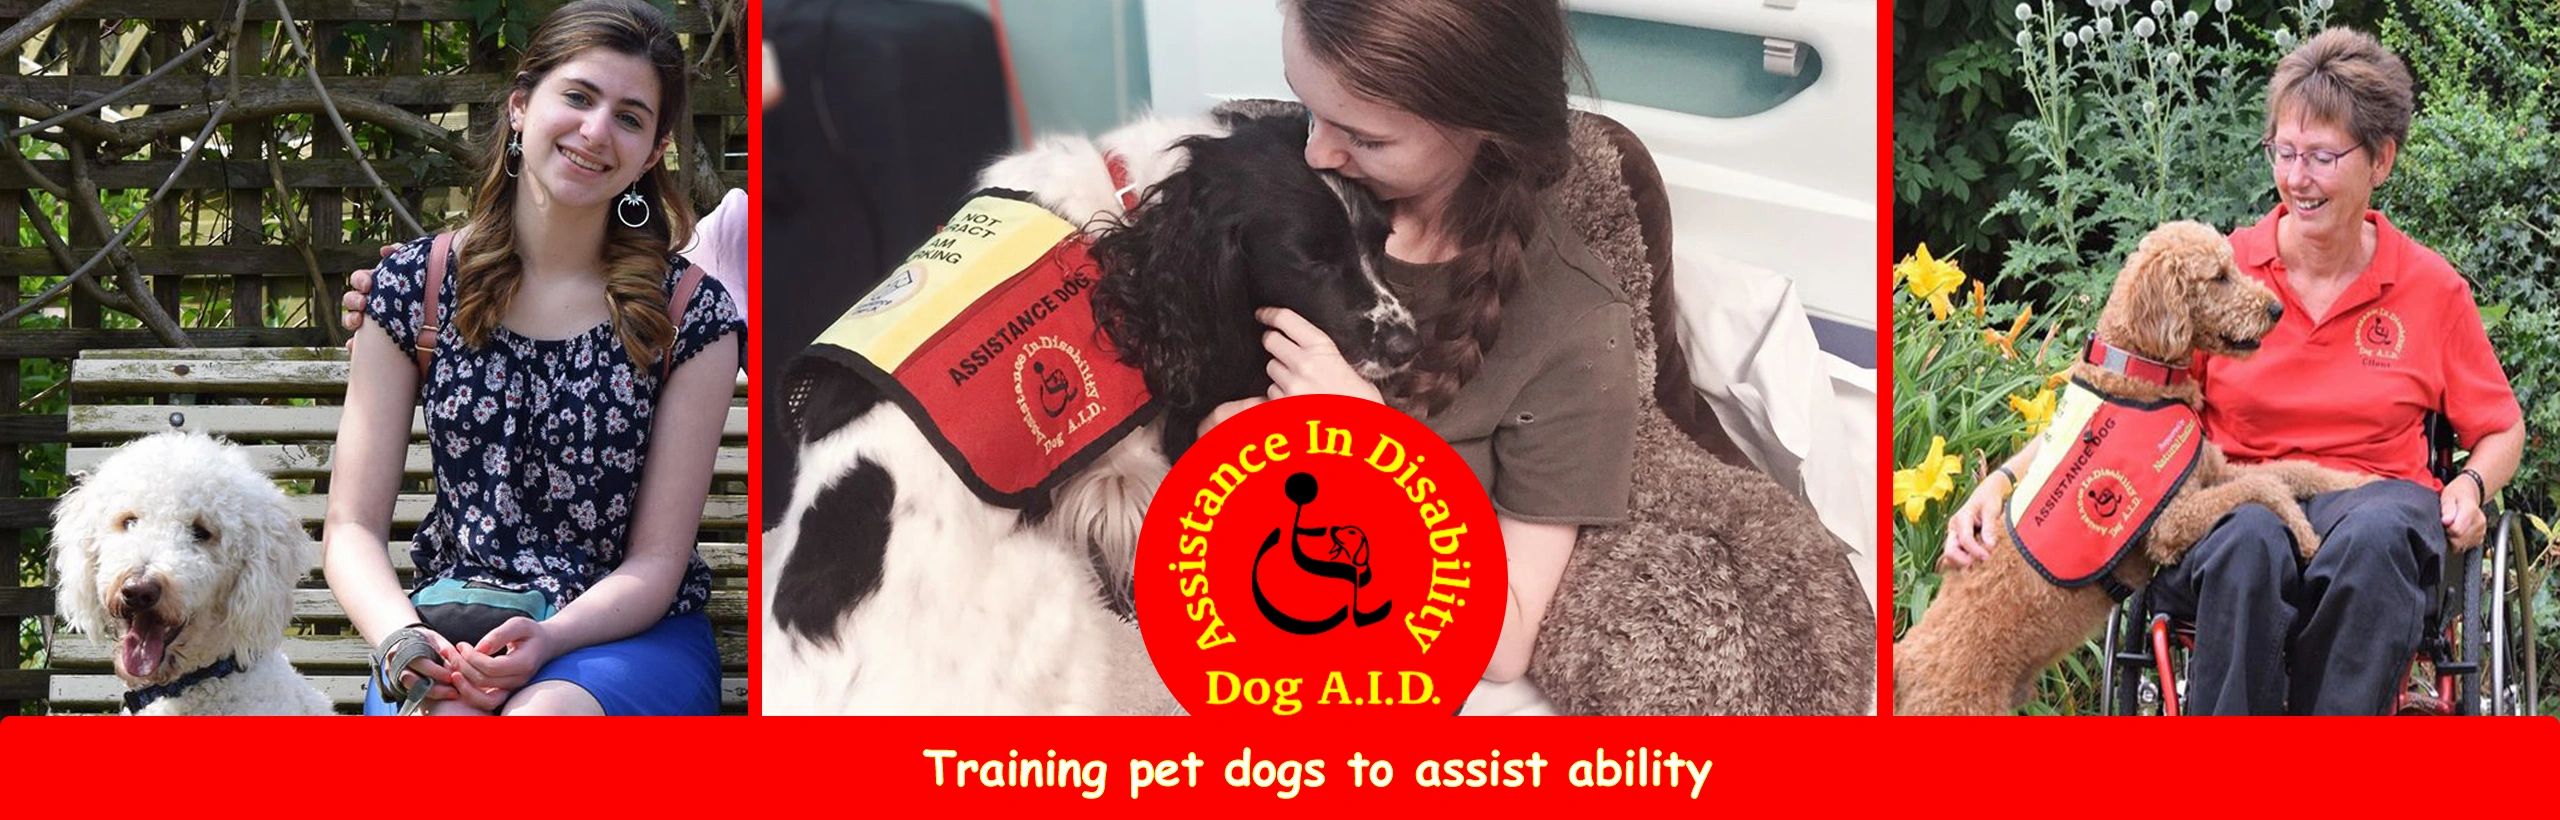 Dog  - Disabled Assistance, Charity, Disability, Assistance Dog